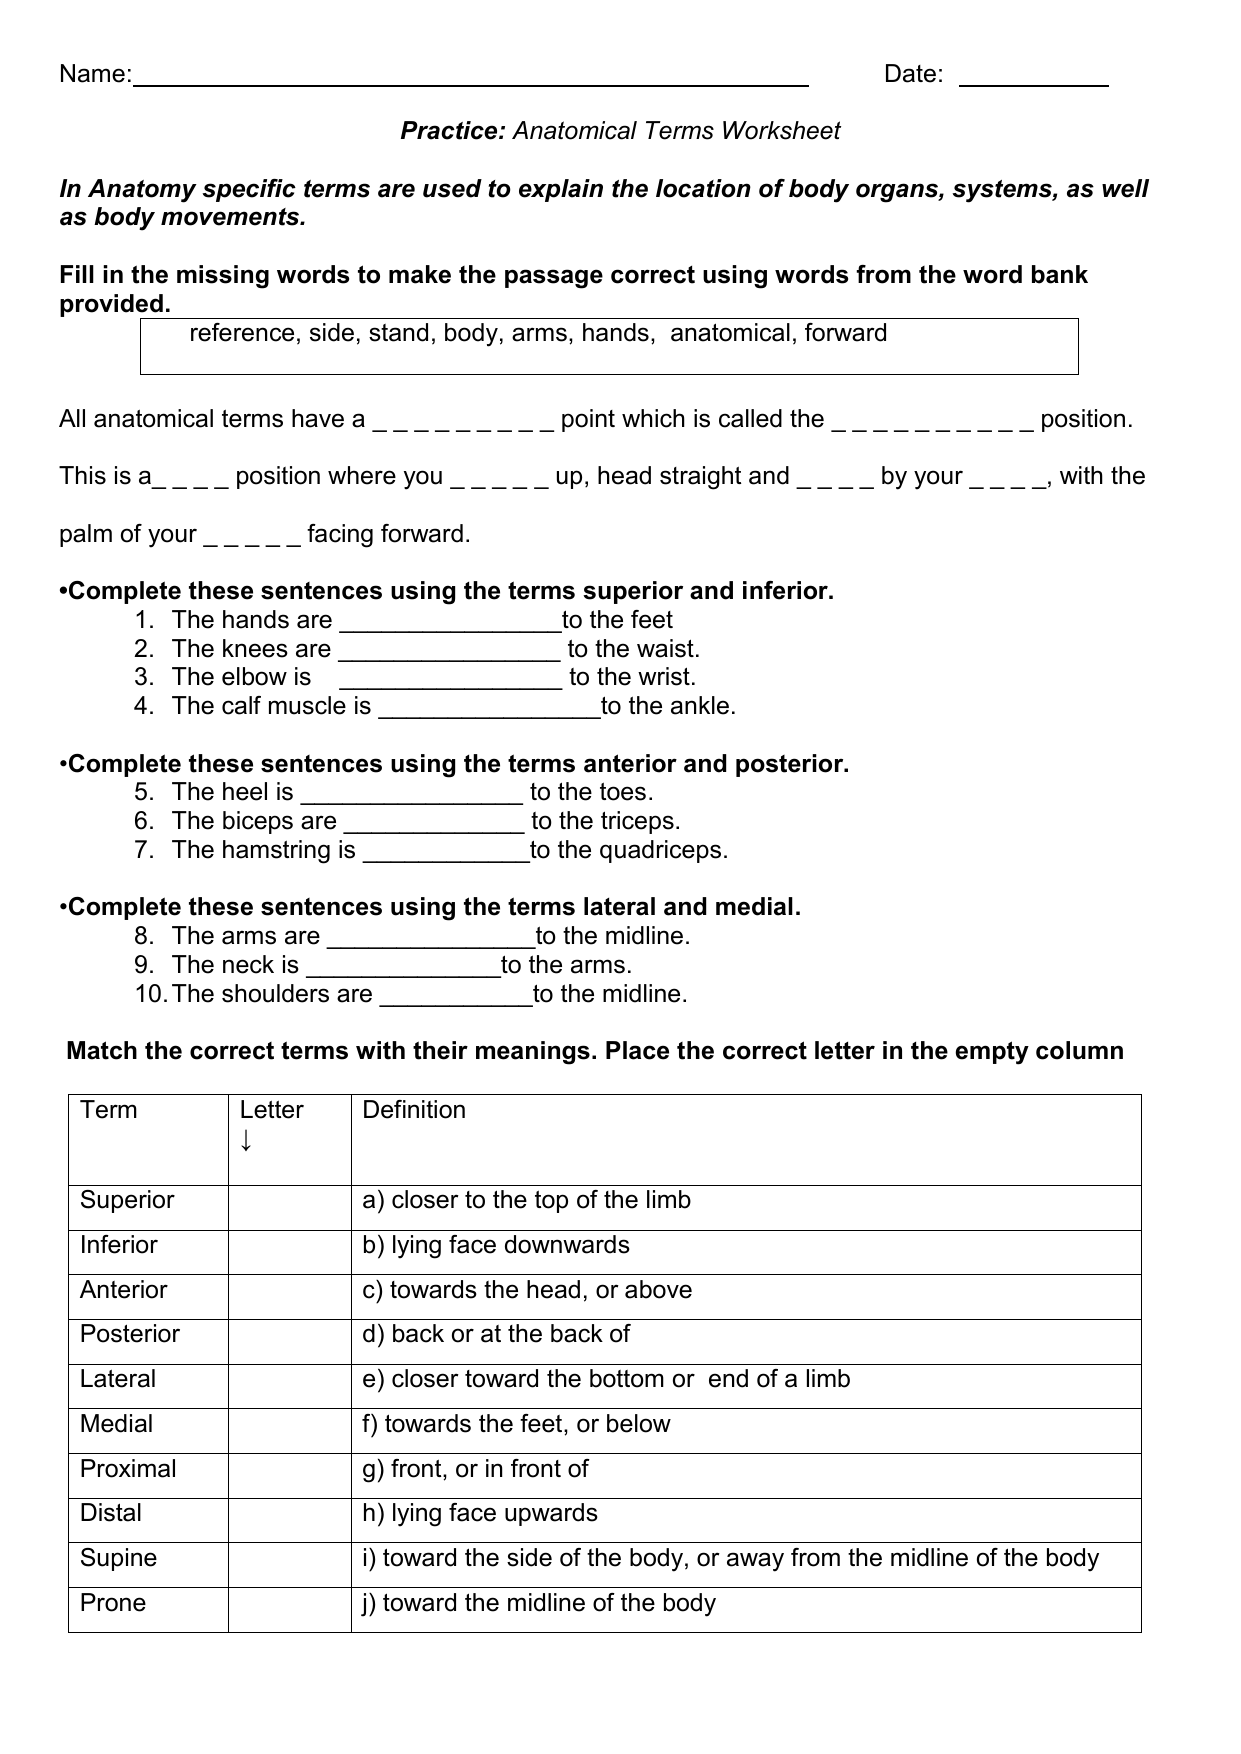 Anatomy Directional Terms Worksheet Answers - Anatomy Drawing Diagram Intended For Anatomical Terms Worksheet Answers